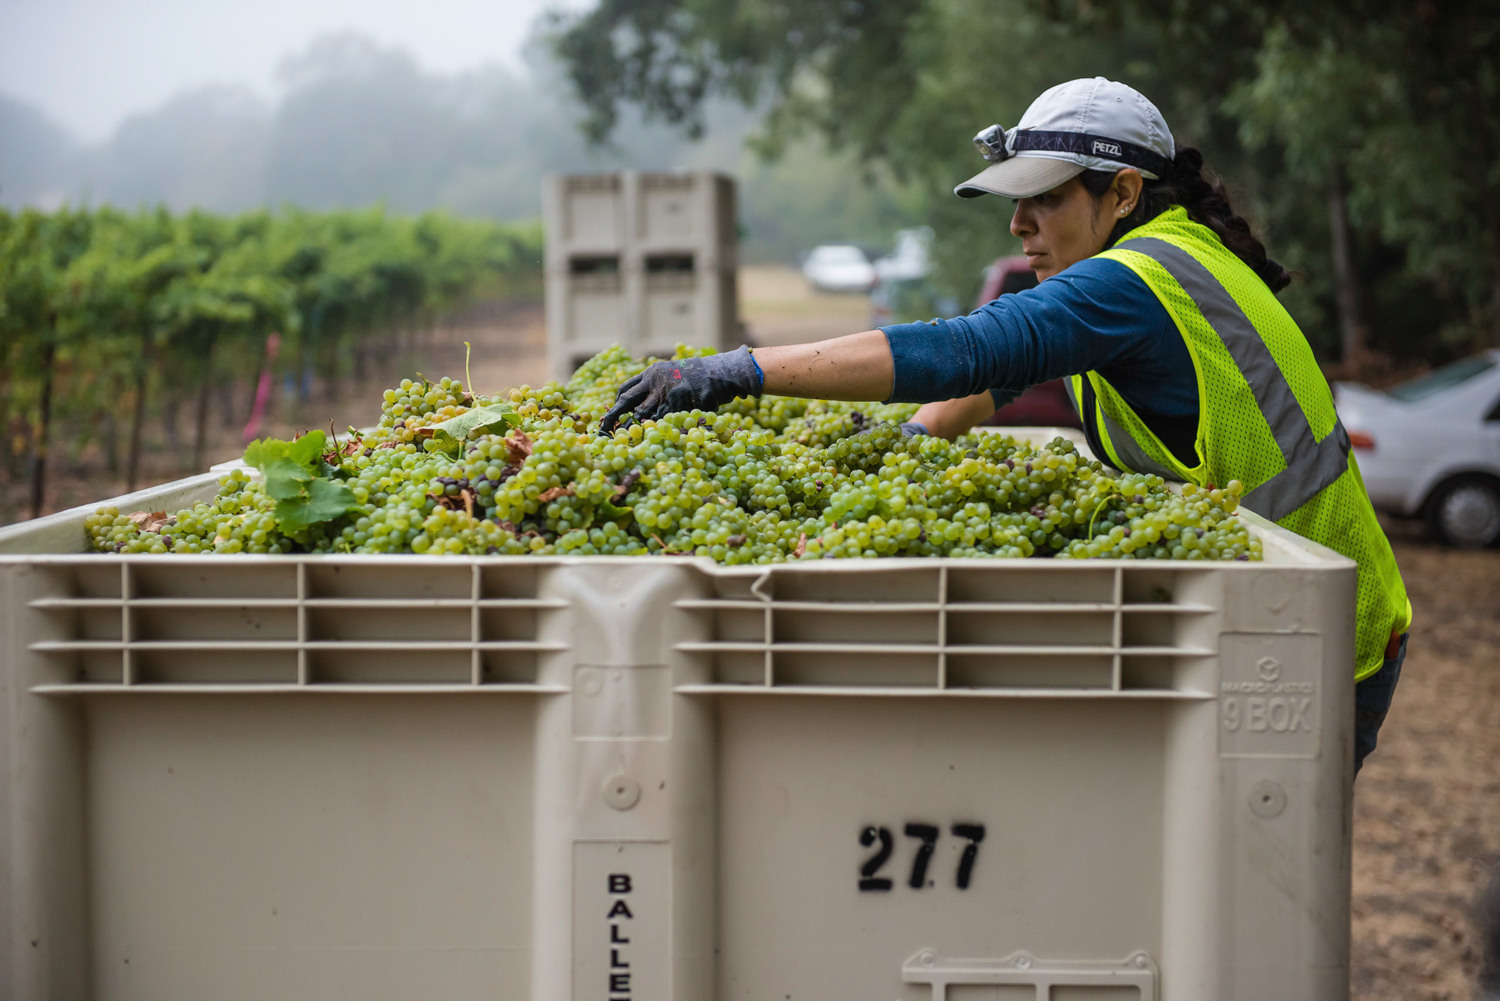 Vineyard_worker_caring_for_Sauv_Blanc_grapes_in_bin.png